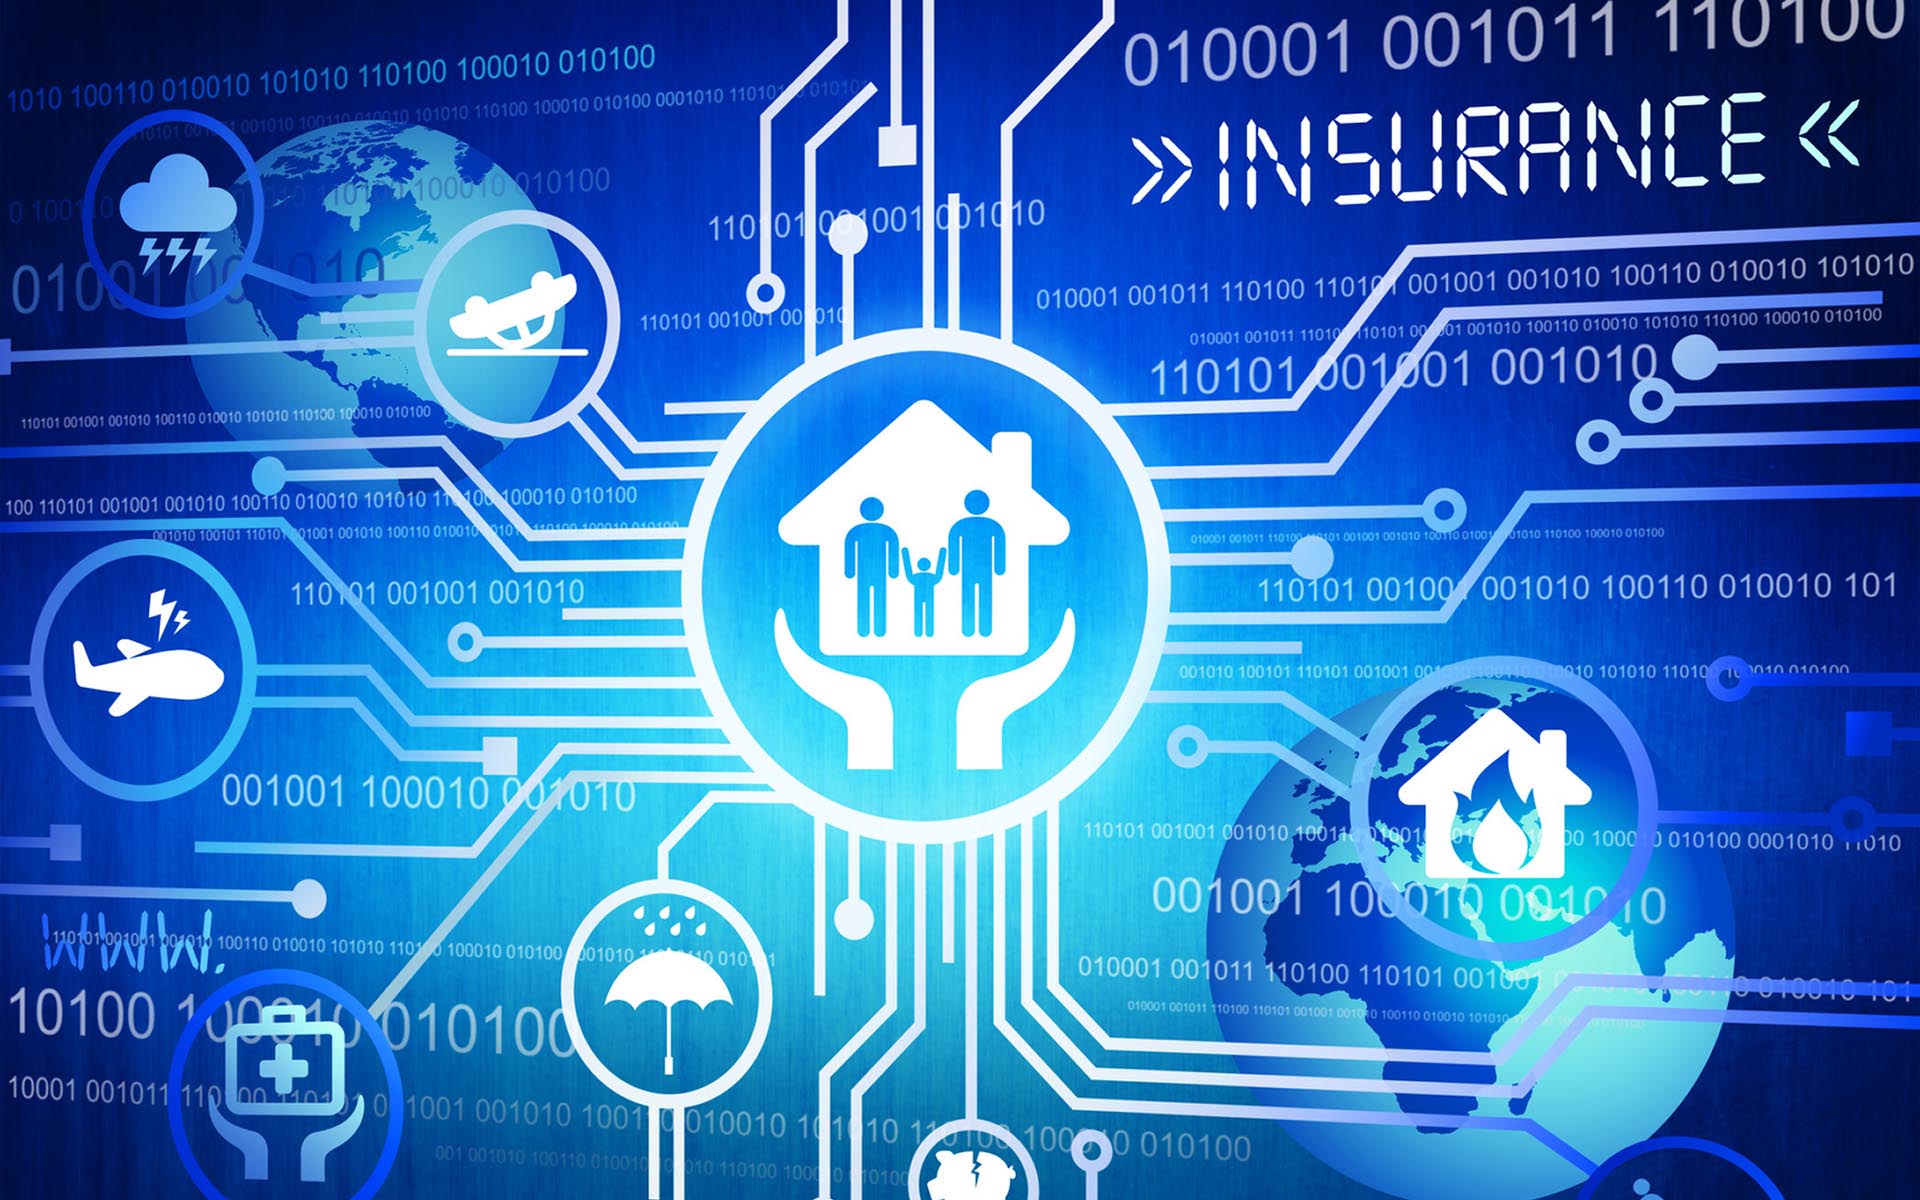 Digital Insurance Company Aigang Launches Blockchain Demo Apps for IoT Devices